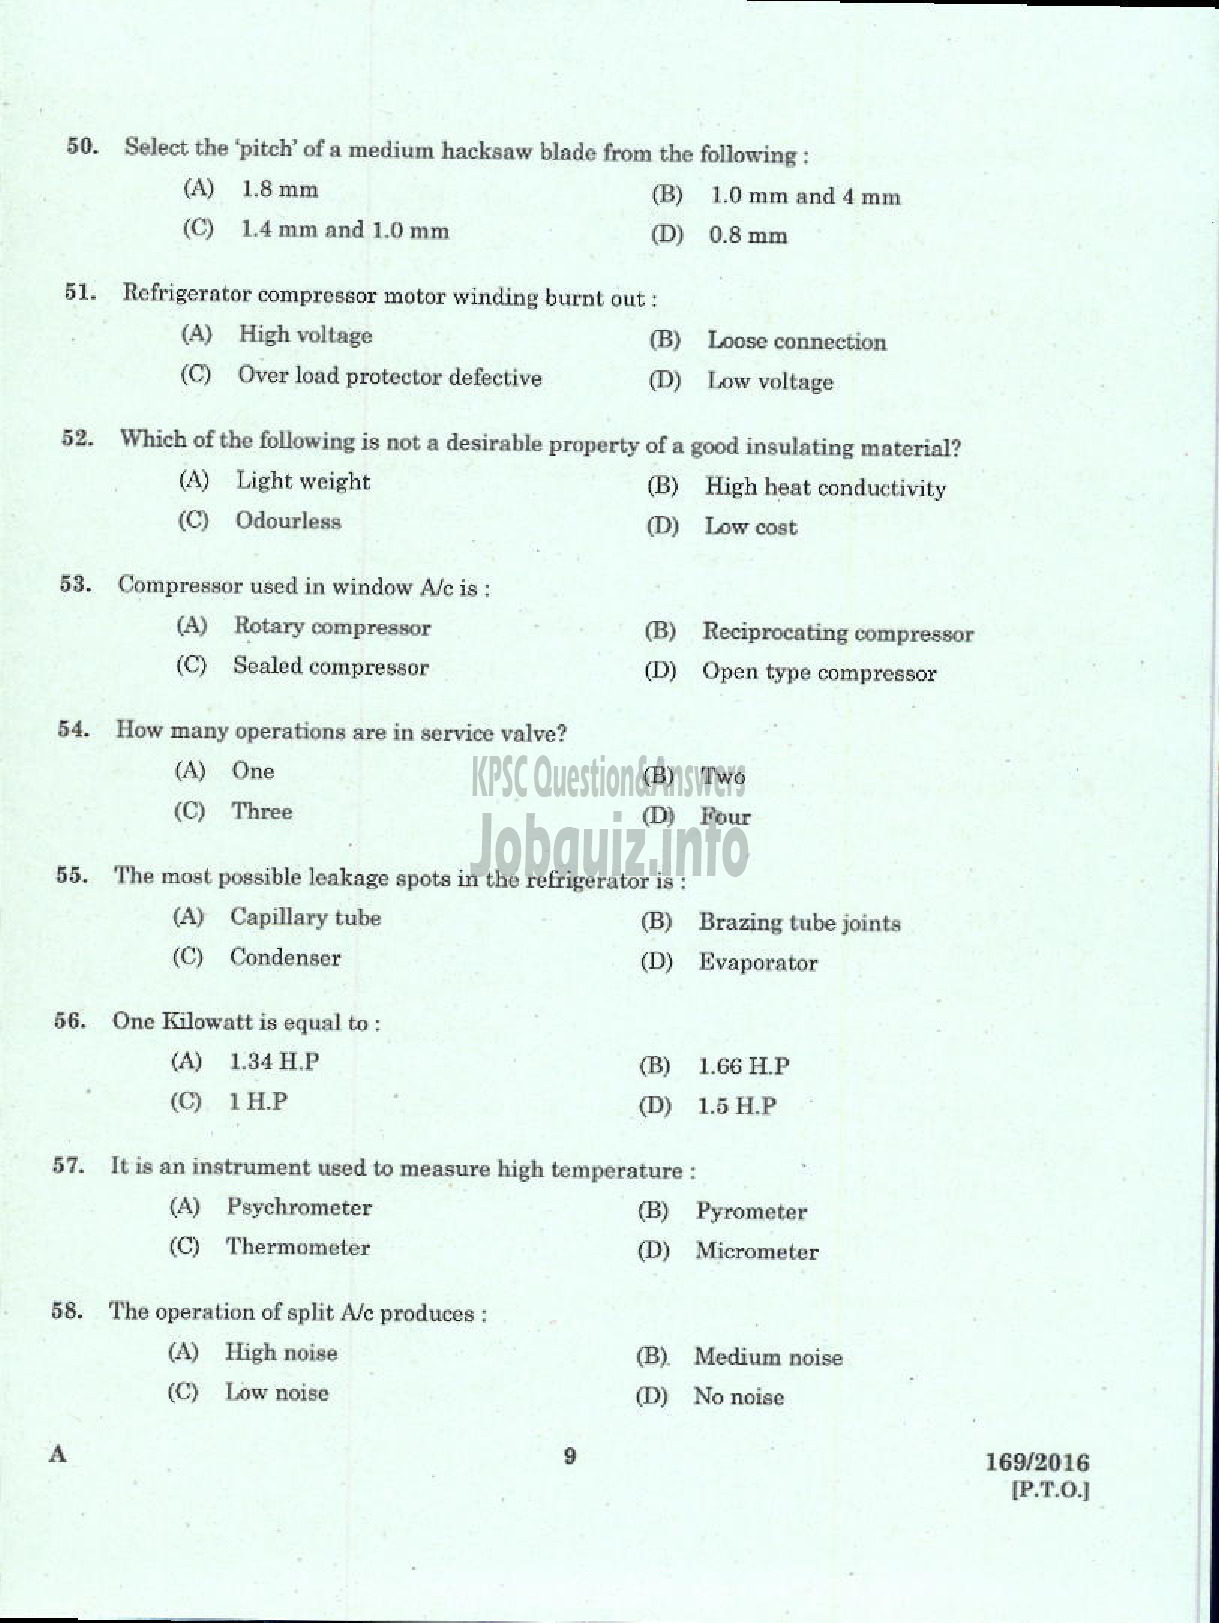 Kerala PSC Question Paper - TRADESMAN REFRIGERATION AND AIR CONDITIONING TECHNICAL EDUCATION-7